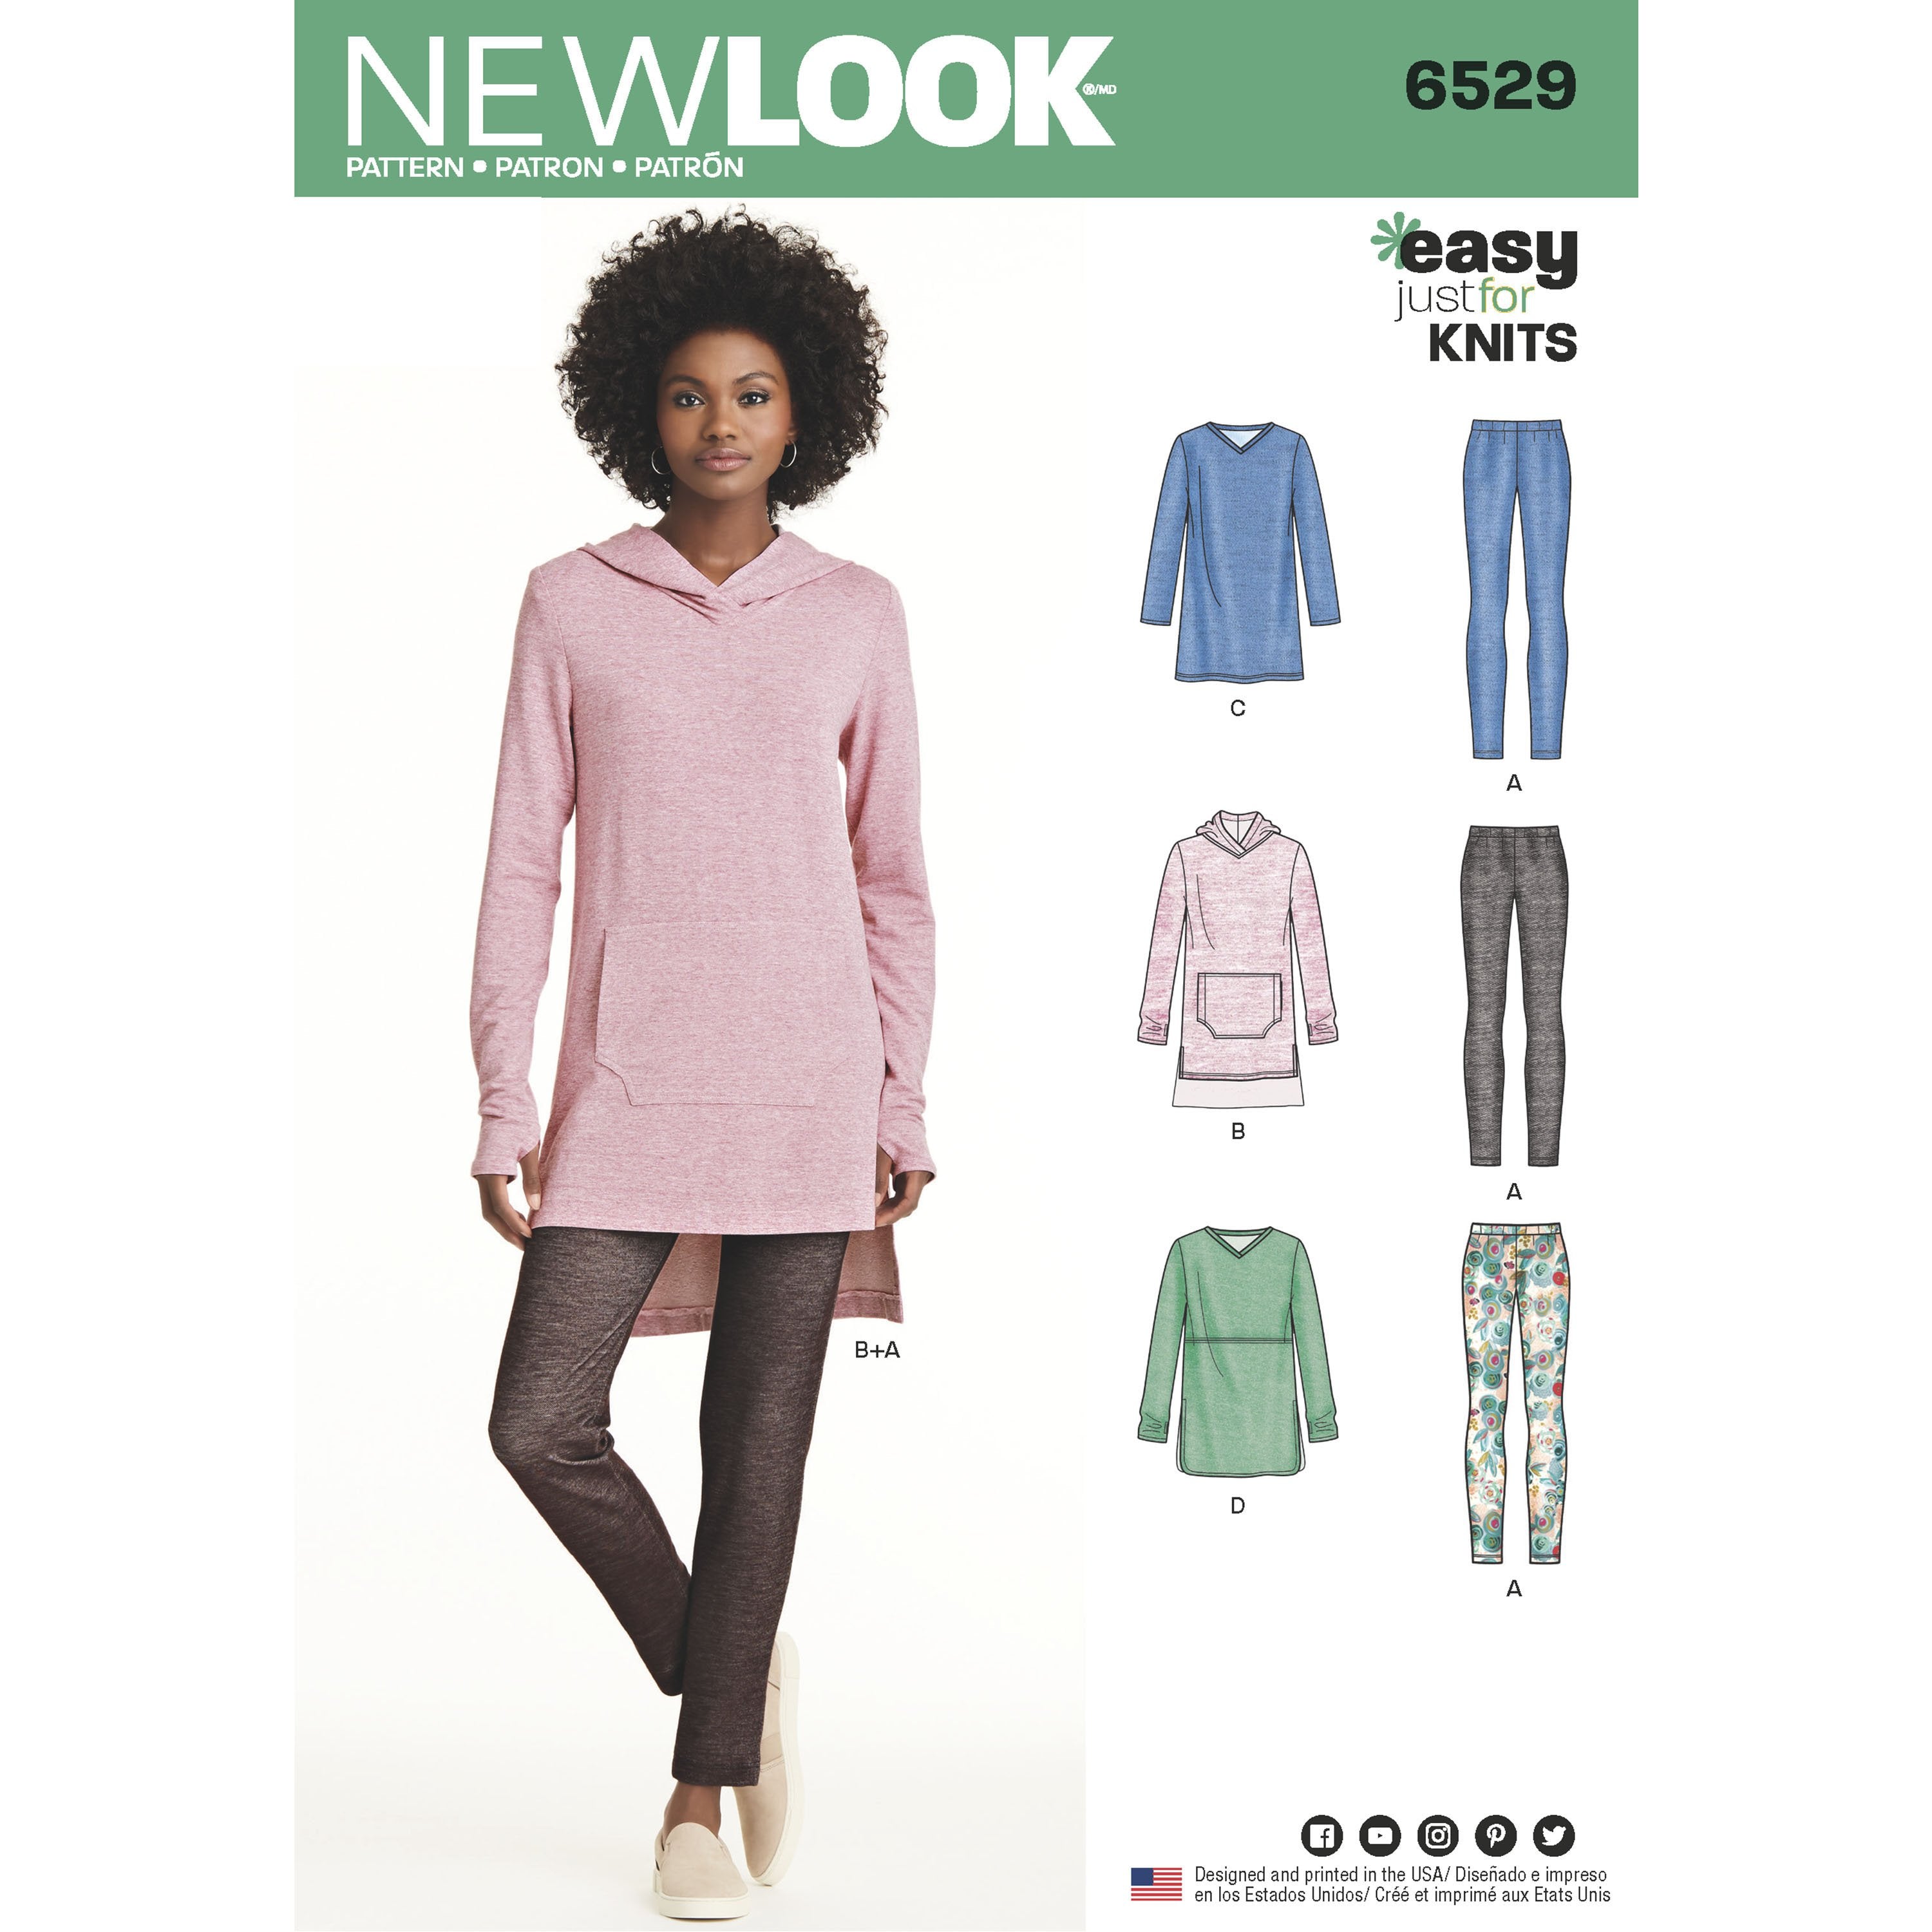 NL6529 Women's Knit Tunics and Leggings from Jaycotts Sewing Supplies